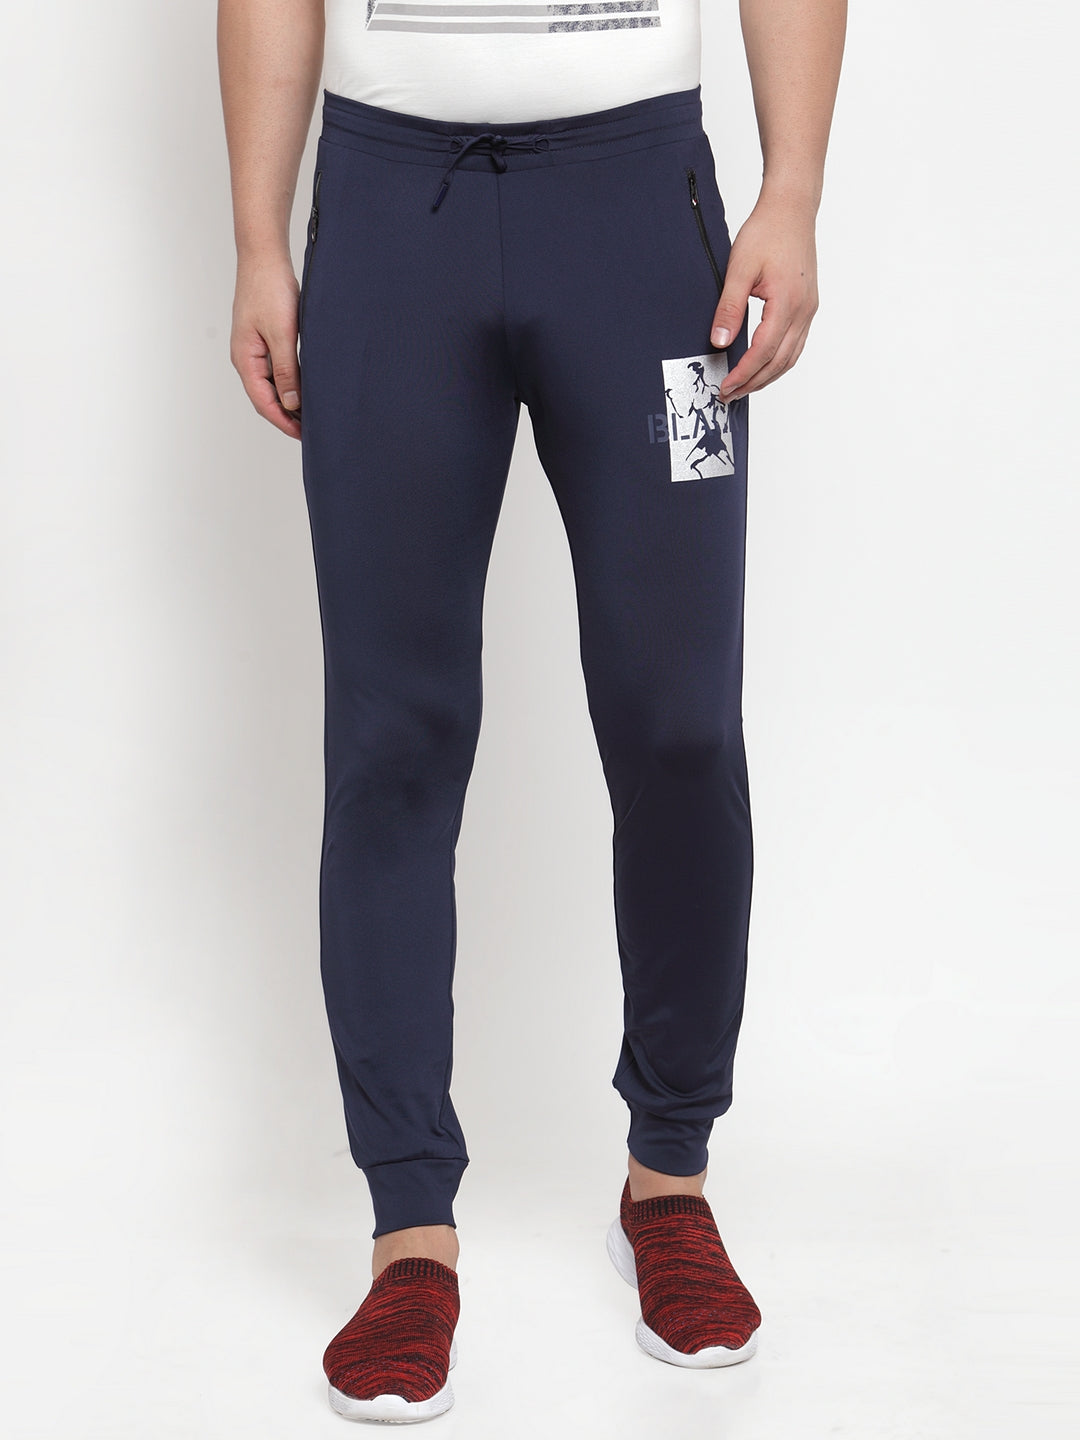 Mens Solid Navy Blue Joggers